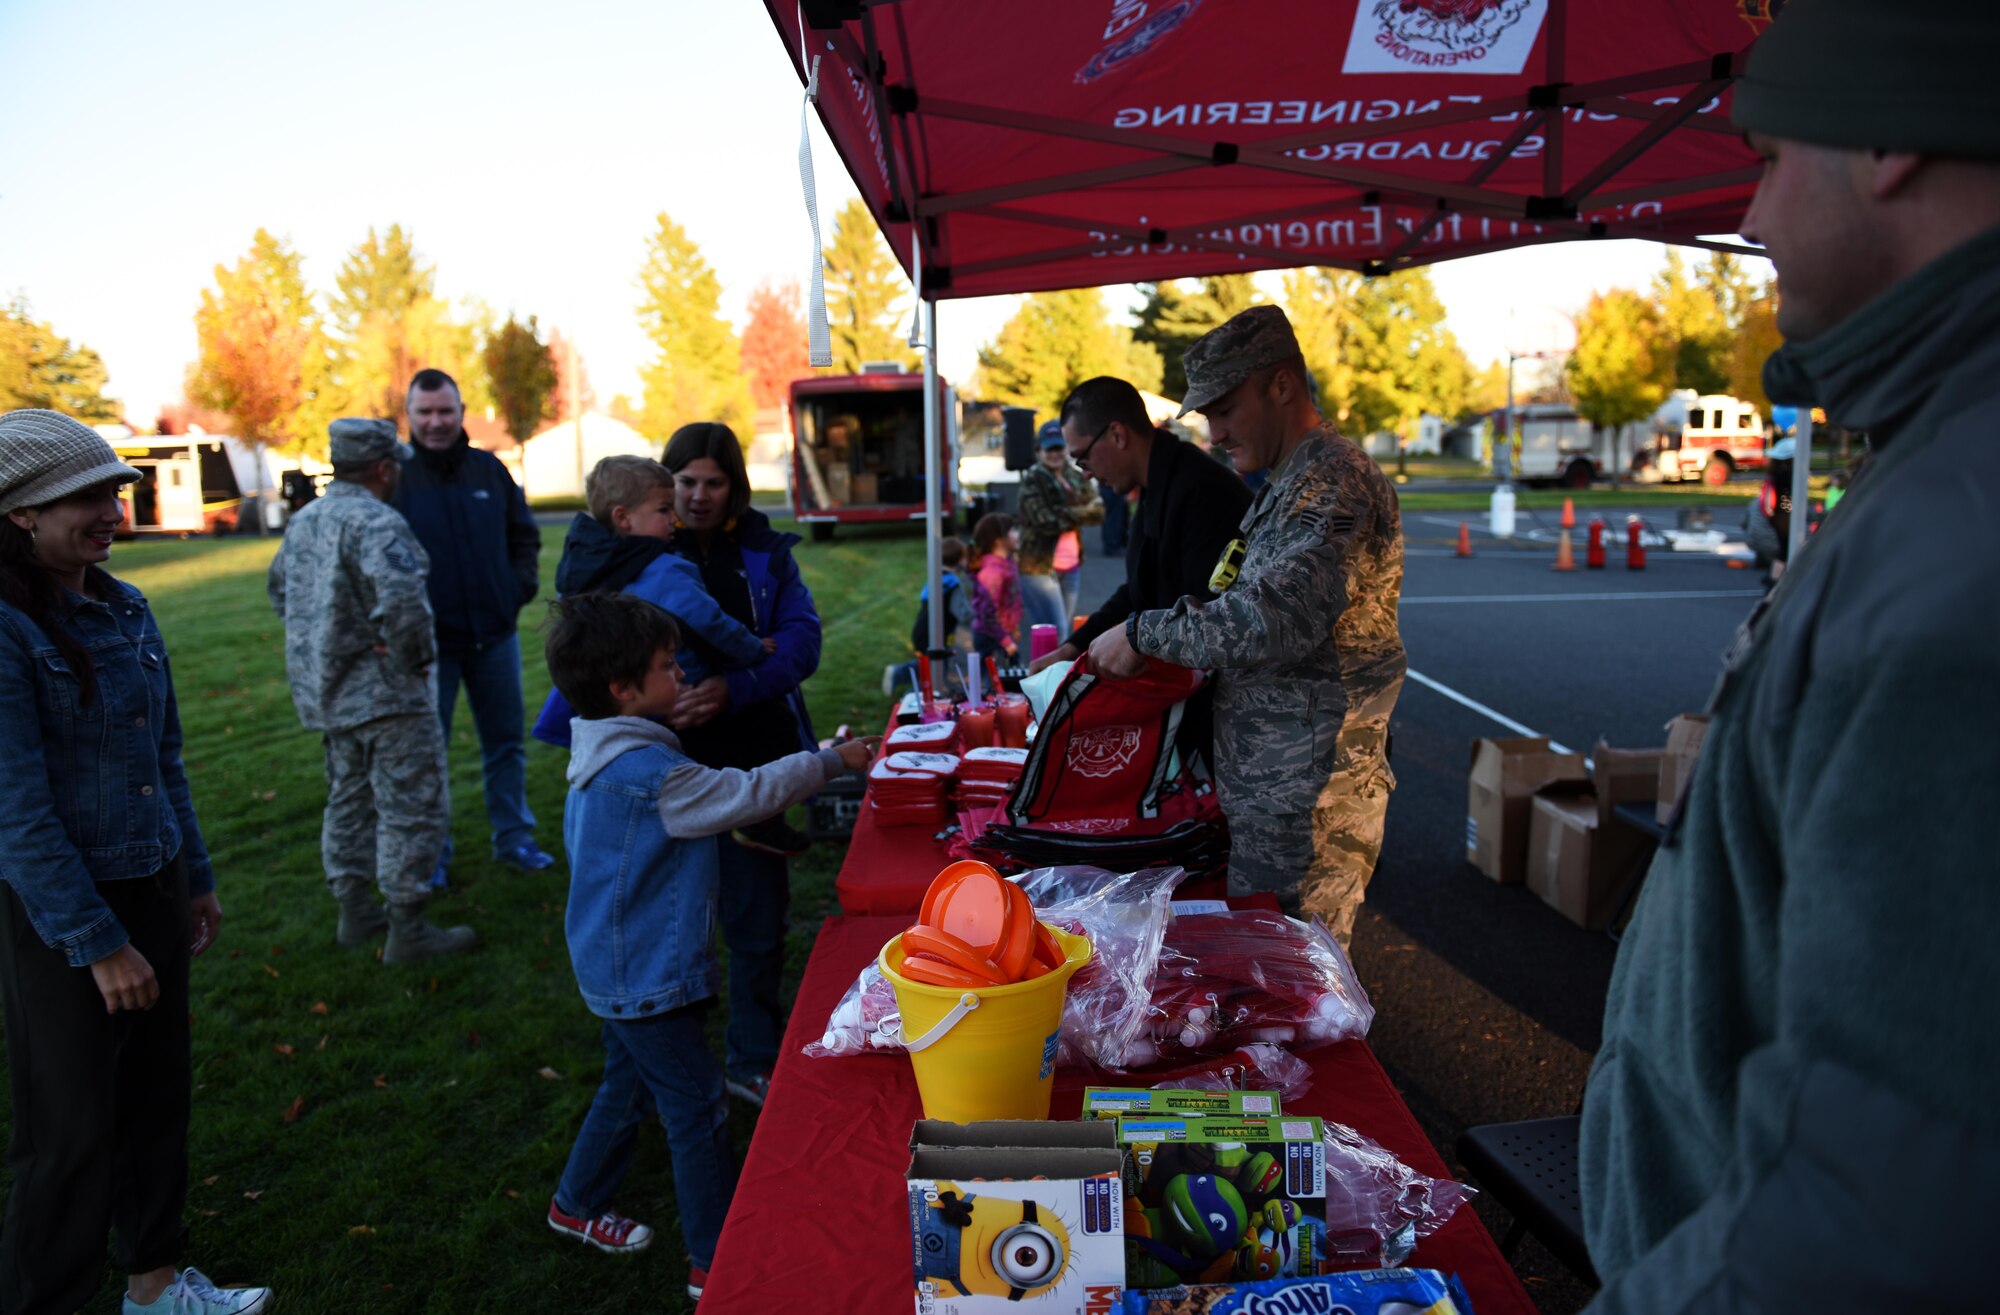 Firefighters from the 92nd Civil Engineer Squadron hand out goodie bags to Team Fairchild families as part of the Fire Prevention Week Carnival Oct. 12, 2016, at Fairchild Air Force Base. Fire Prevention Week was started in 1922 to commemorate the Great Chicago Fire in 1871. The fire killed 250 people, left 100,000 homeless and burned more than 2,000 acres. According to the National Fire Protection Association, the Great Chicago fire drastically changed the way the public and firefighters think about fire prevention. The International Fire Marshals Association decided the anniversary of the Great Chicago Fire should be used to spread fire safety awareness. (U.S. Air Force photo/Airman 1st Class Sean Campbell)